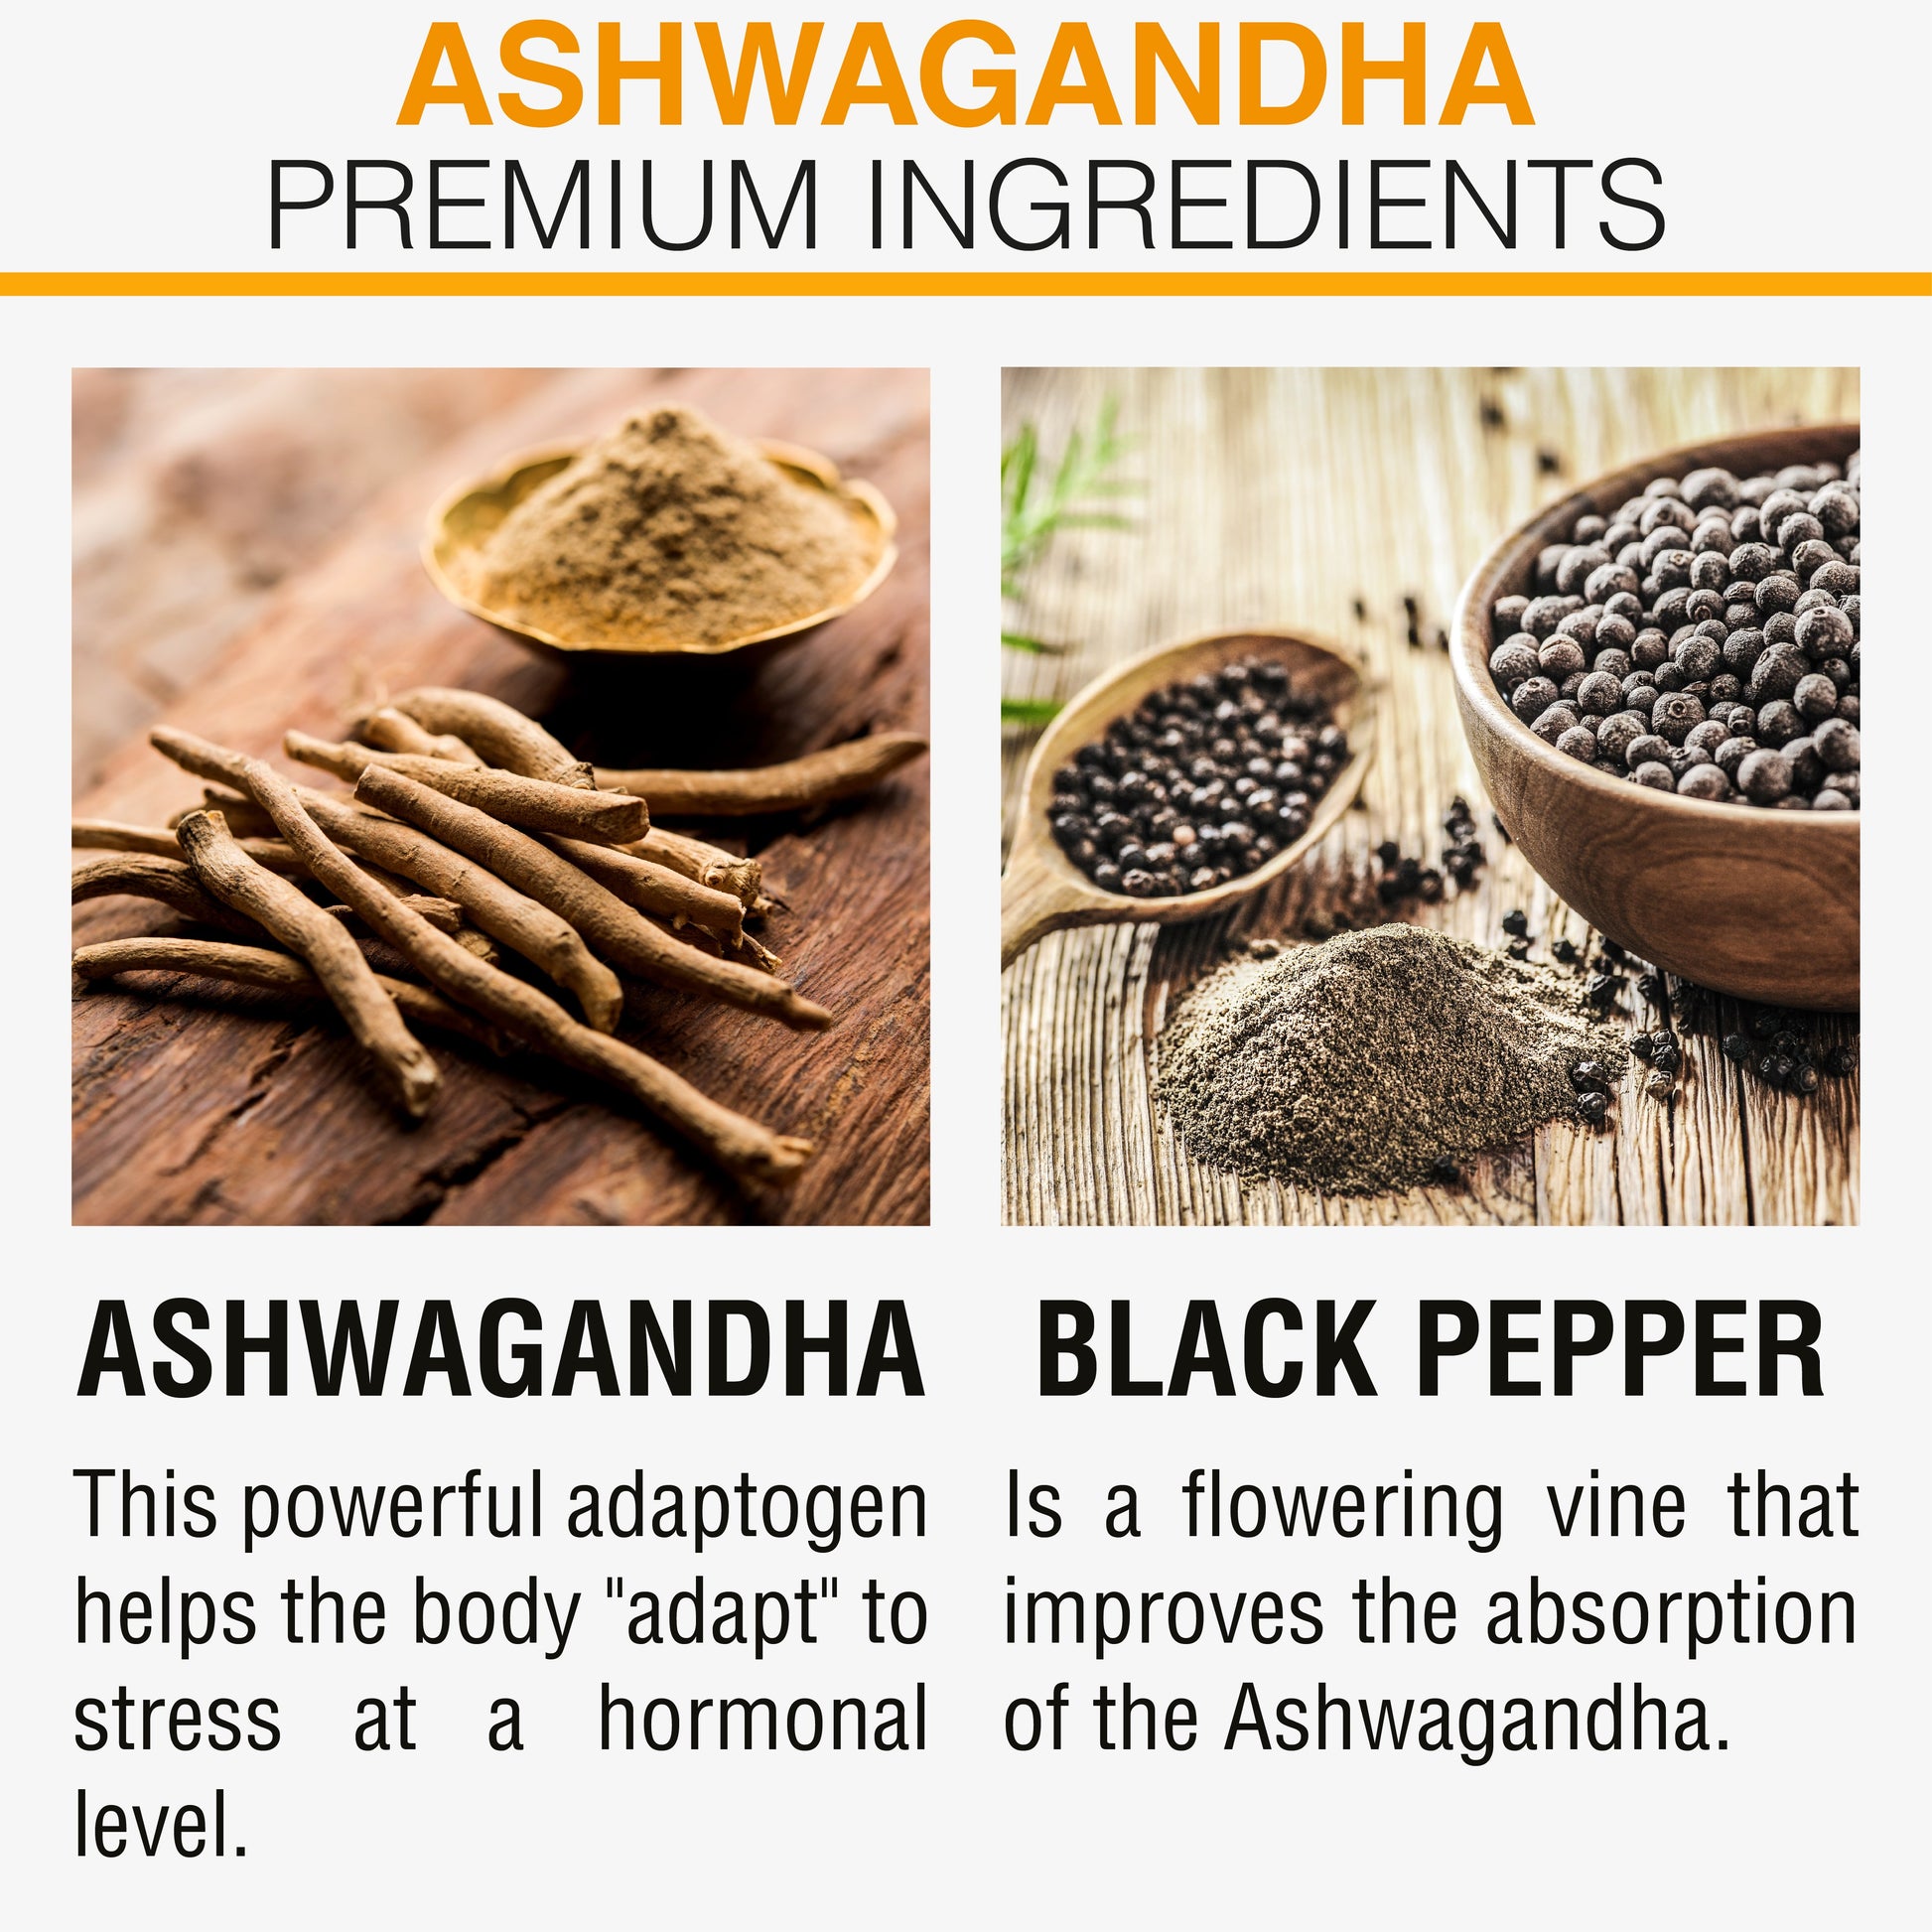 Ashwagandha supplement by Mia Adora premium ingredients: ashwagandha is a powerful adaptogen that helps the body "adapt" to stress at a hormonal level. Black pepper is a flowering vine that improves the absorption of the ashwagandha